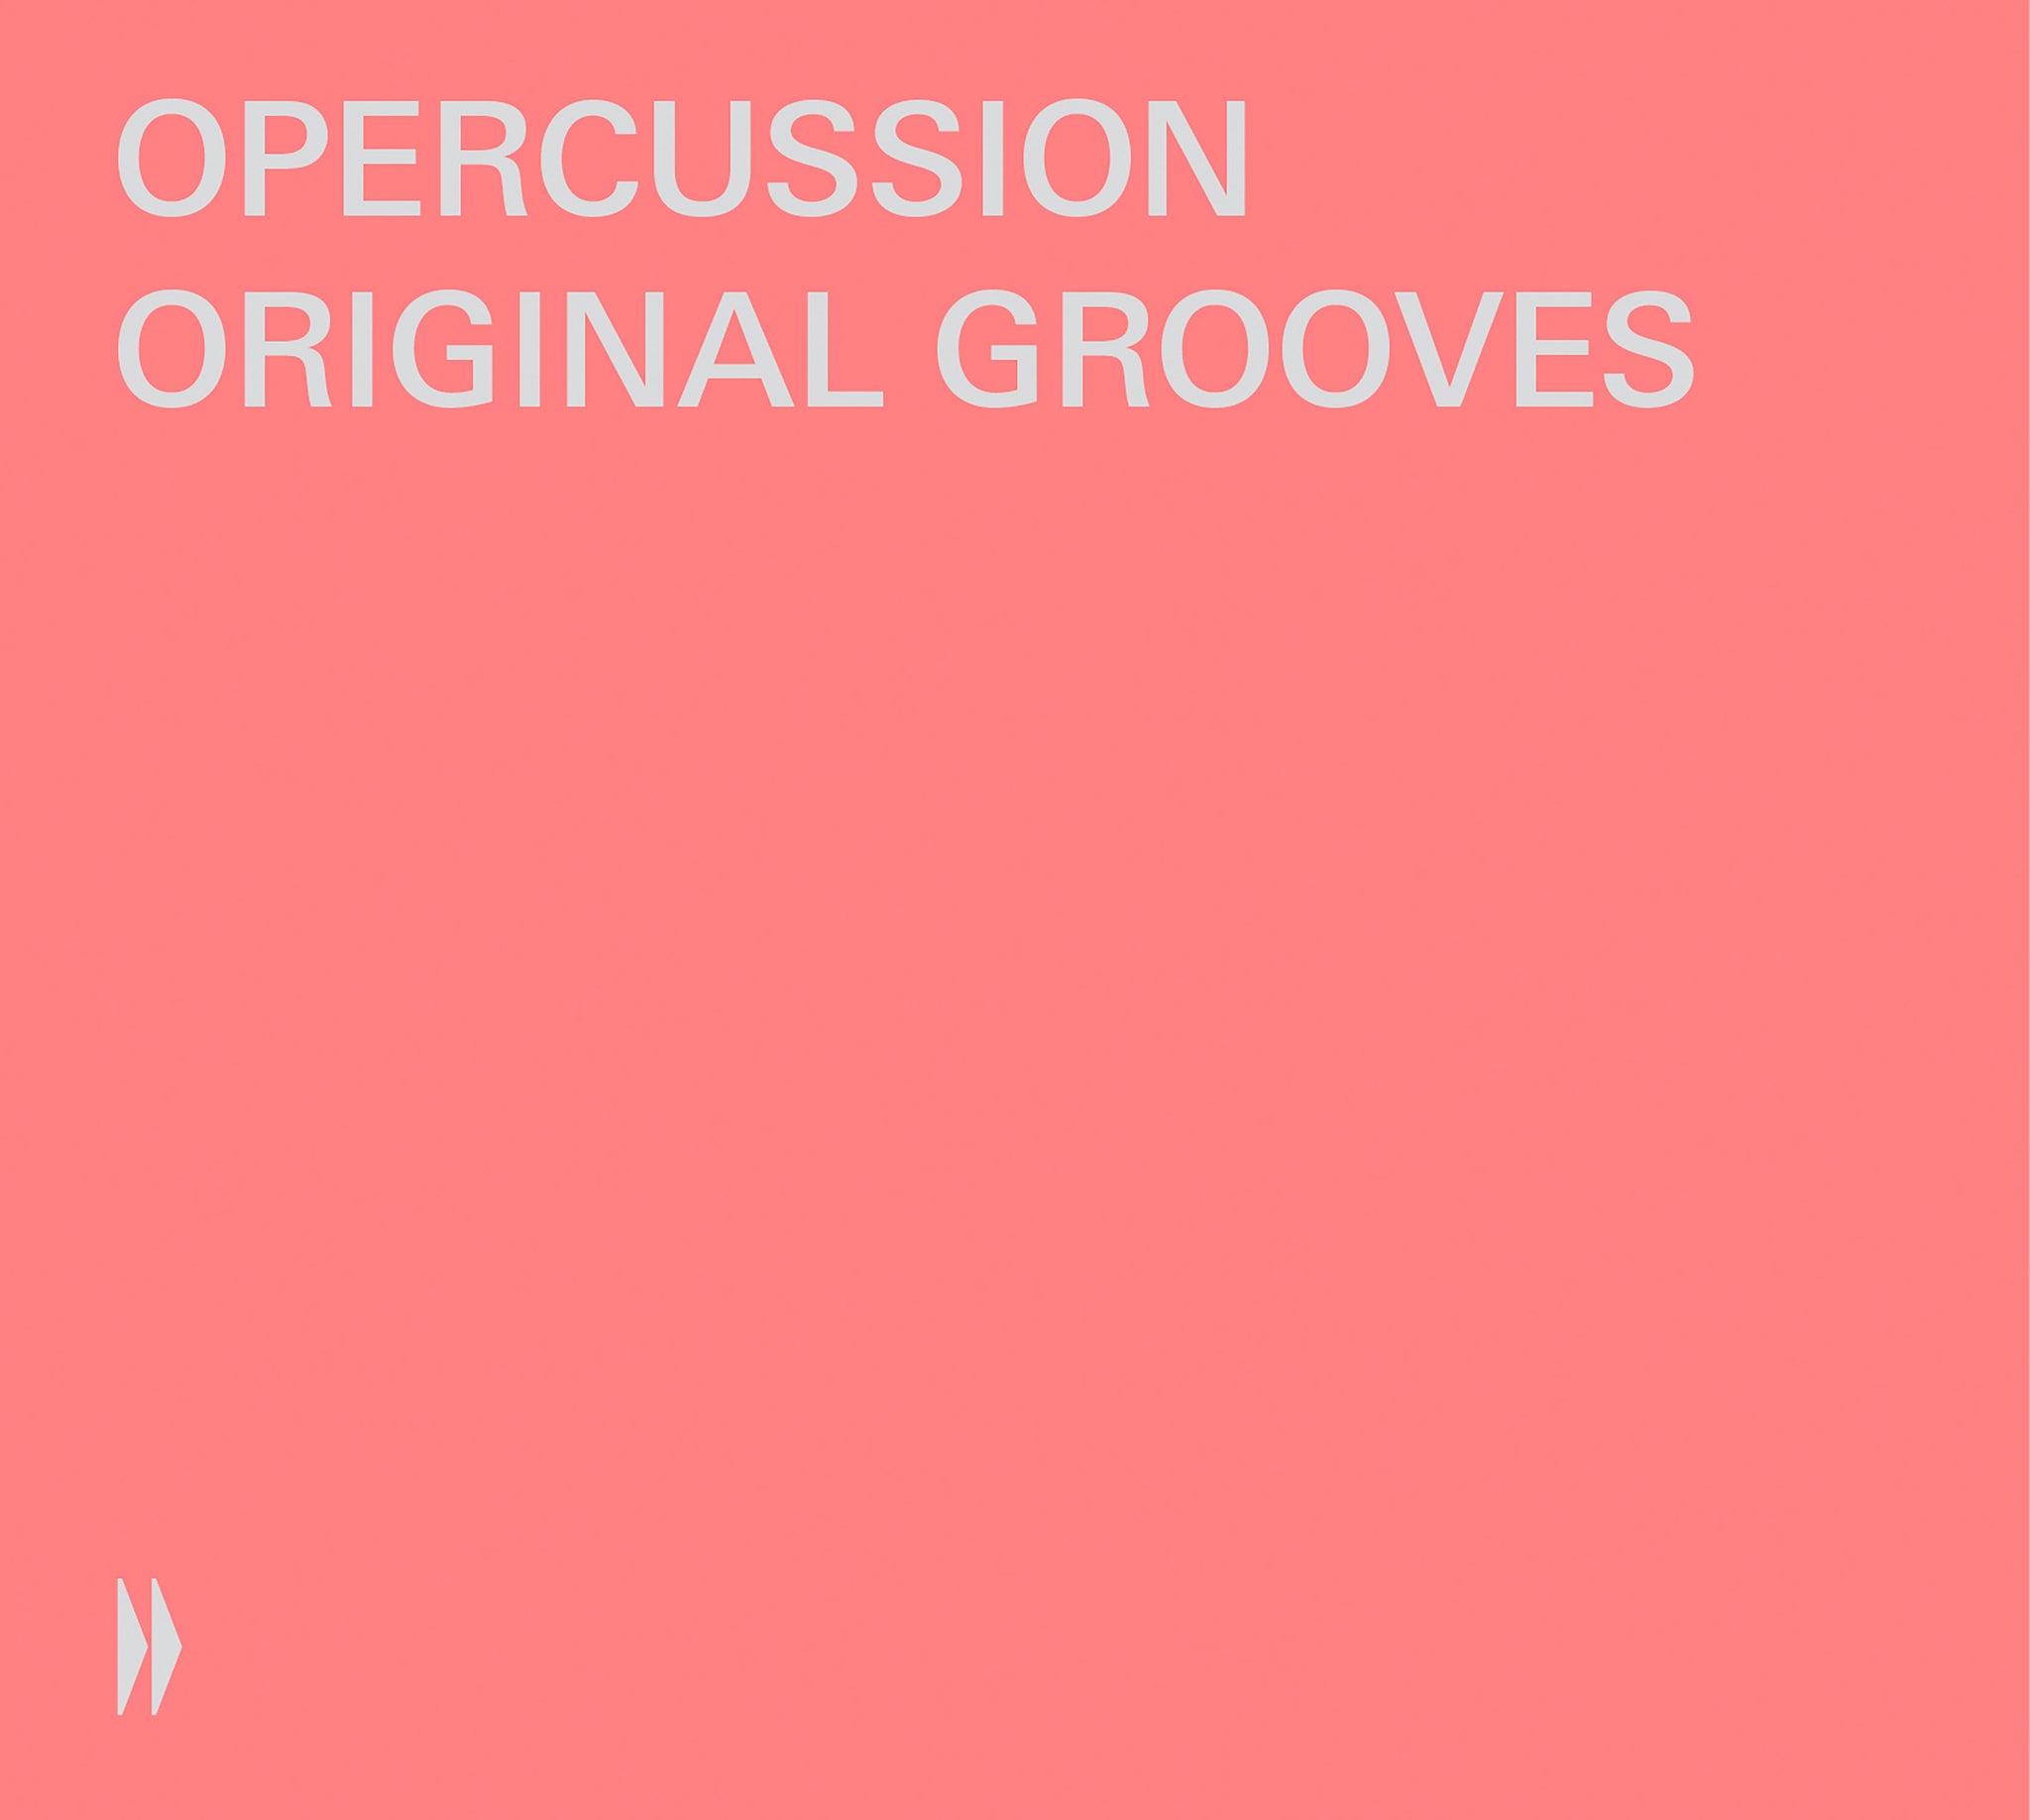 Original Grooves - Percussion from the Bayerische Staatsorchester / Opercussion